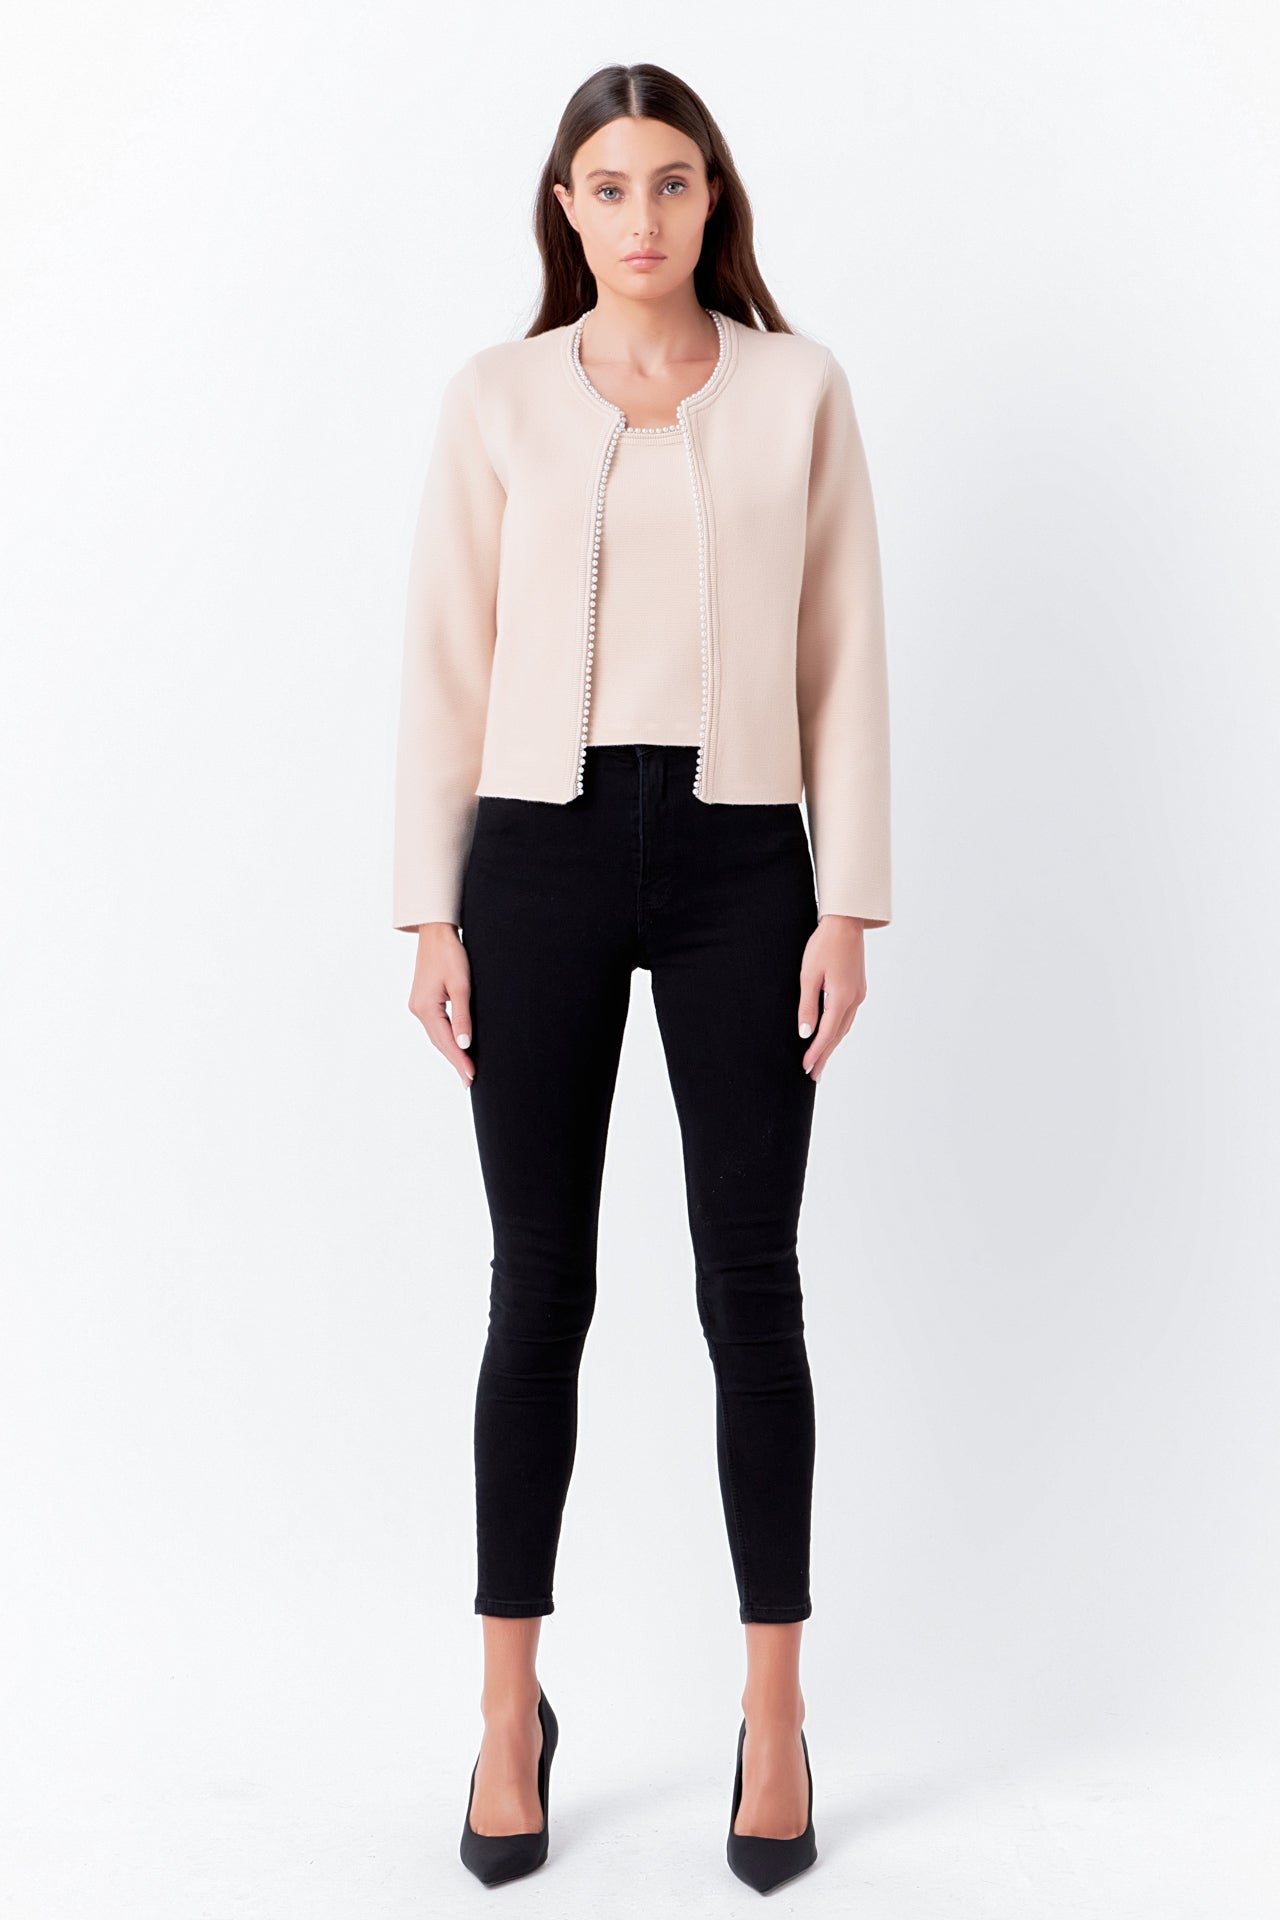 ENDLESS ROSE - Pearl Trim Knit Cardigan - JACKETS available at Objectrare